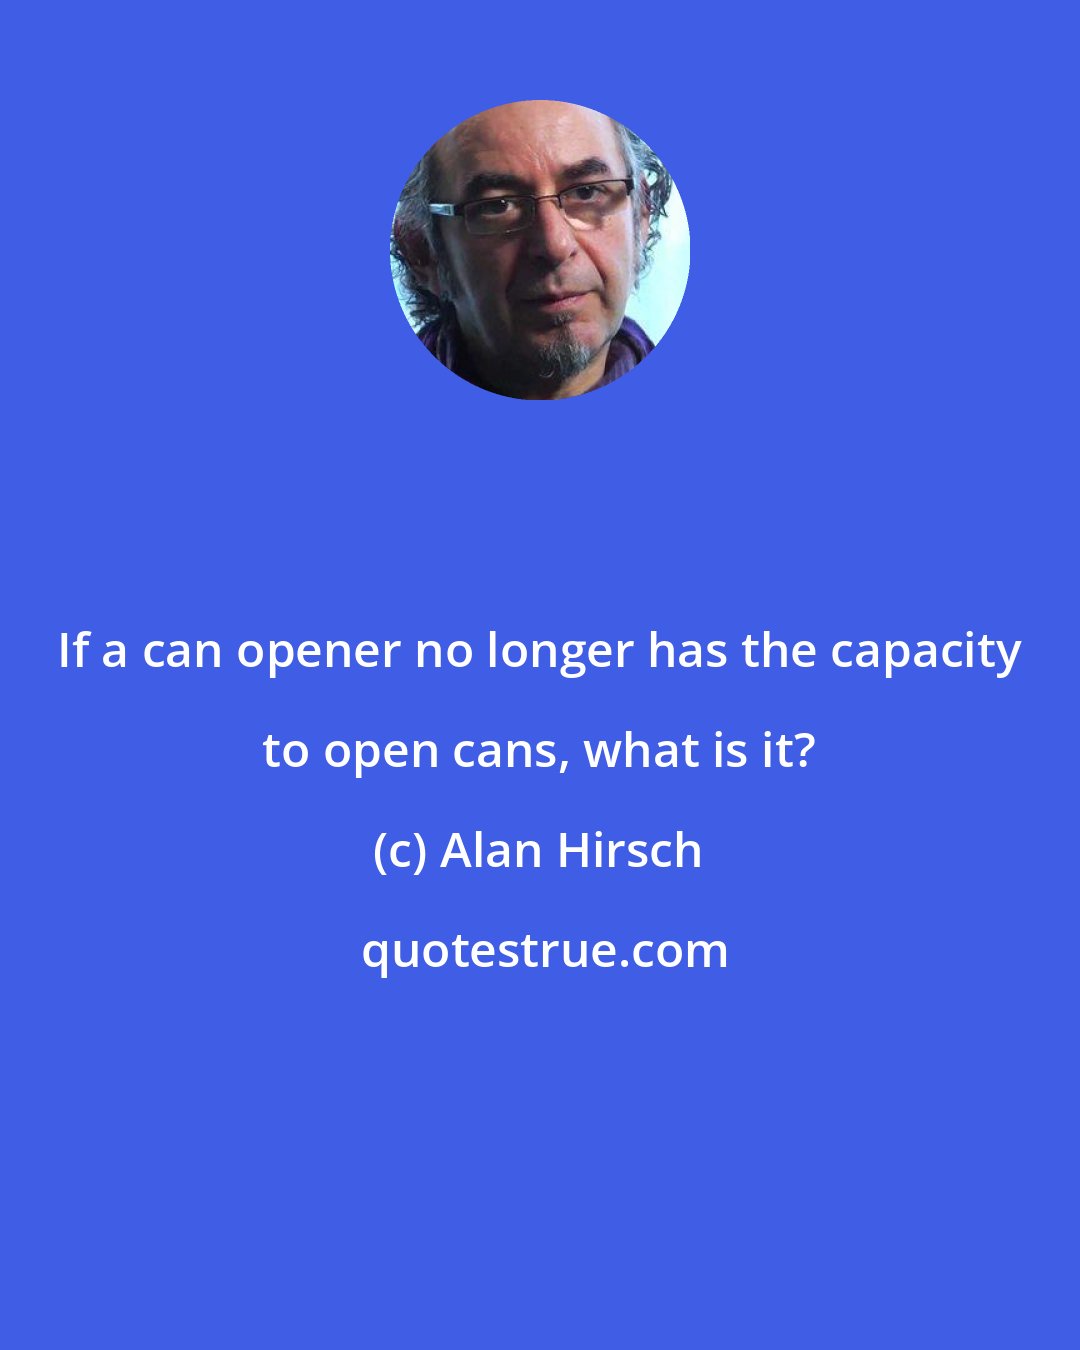 Alan Hirsch: If a can opener no longer has the capacity to open cans, what is it?